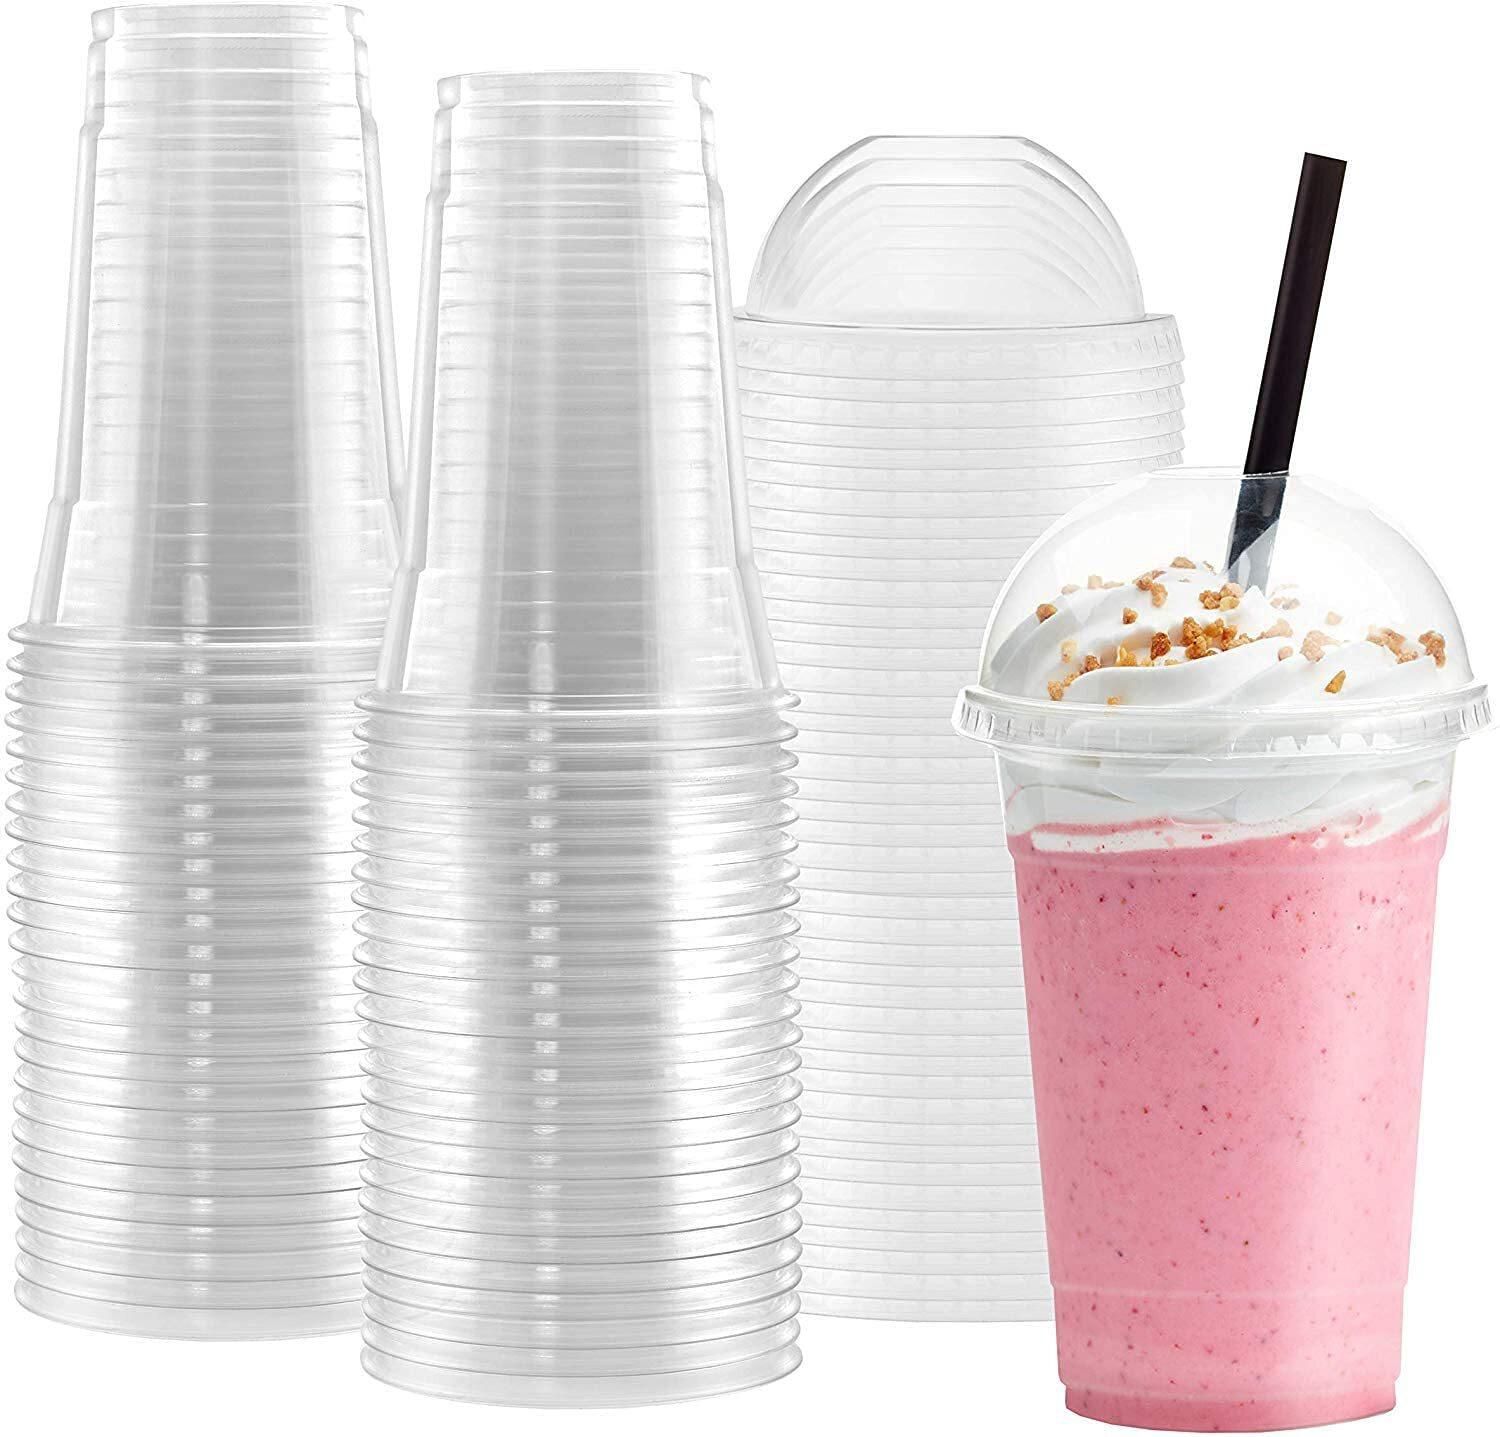 16 oz. Plastic Cups With Dome Lids [50 Sets] Disposable Clear Cups for Cold Drinks, Dessert, Milkshake, Iced Coffee, Slush, Smoothies&hellip;